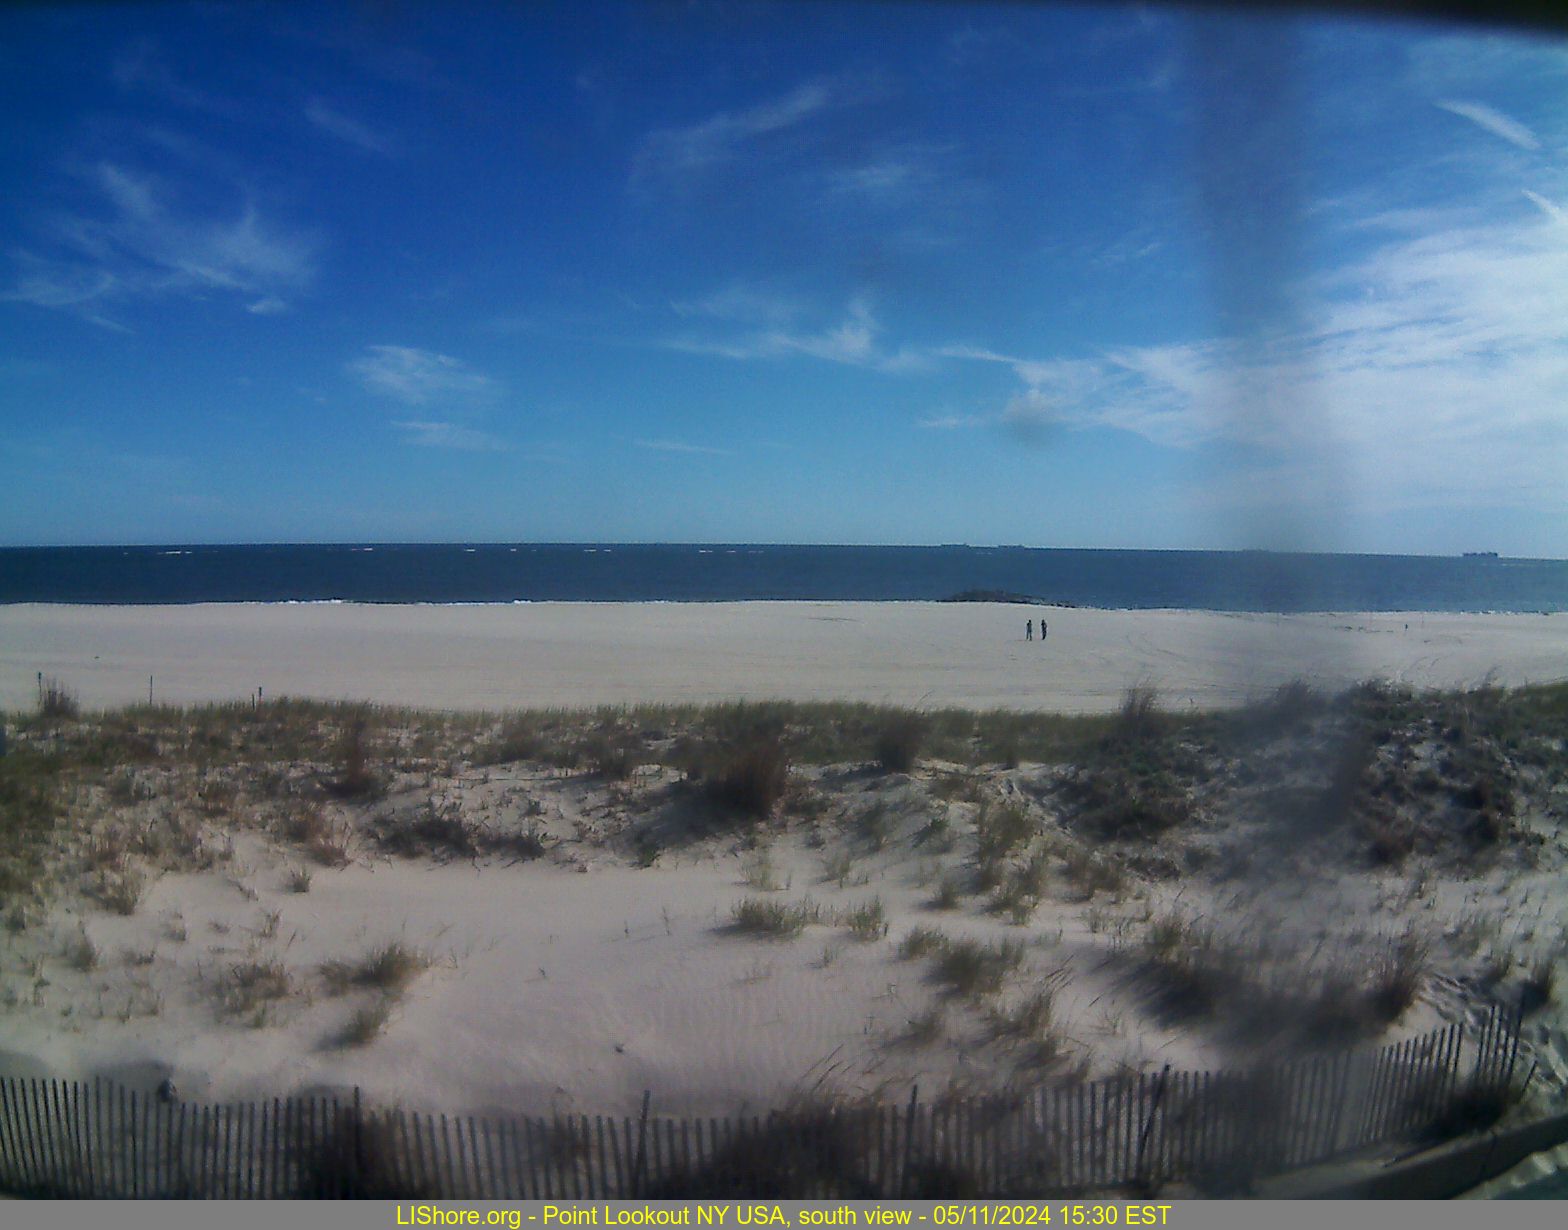 Point Lookout NY USA - new camera south view - zoomed